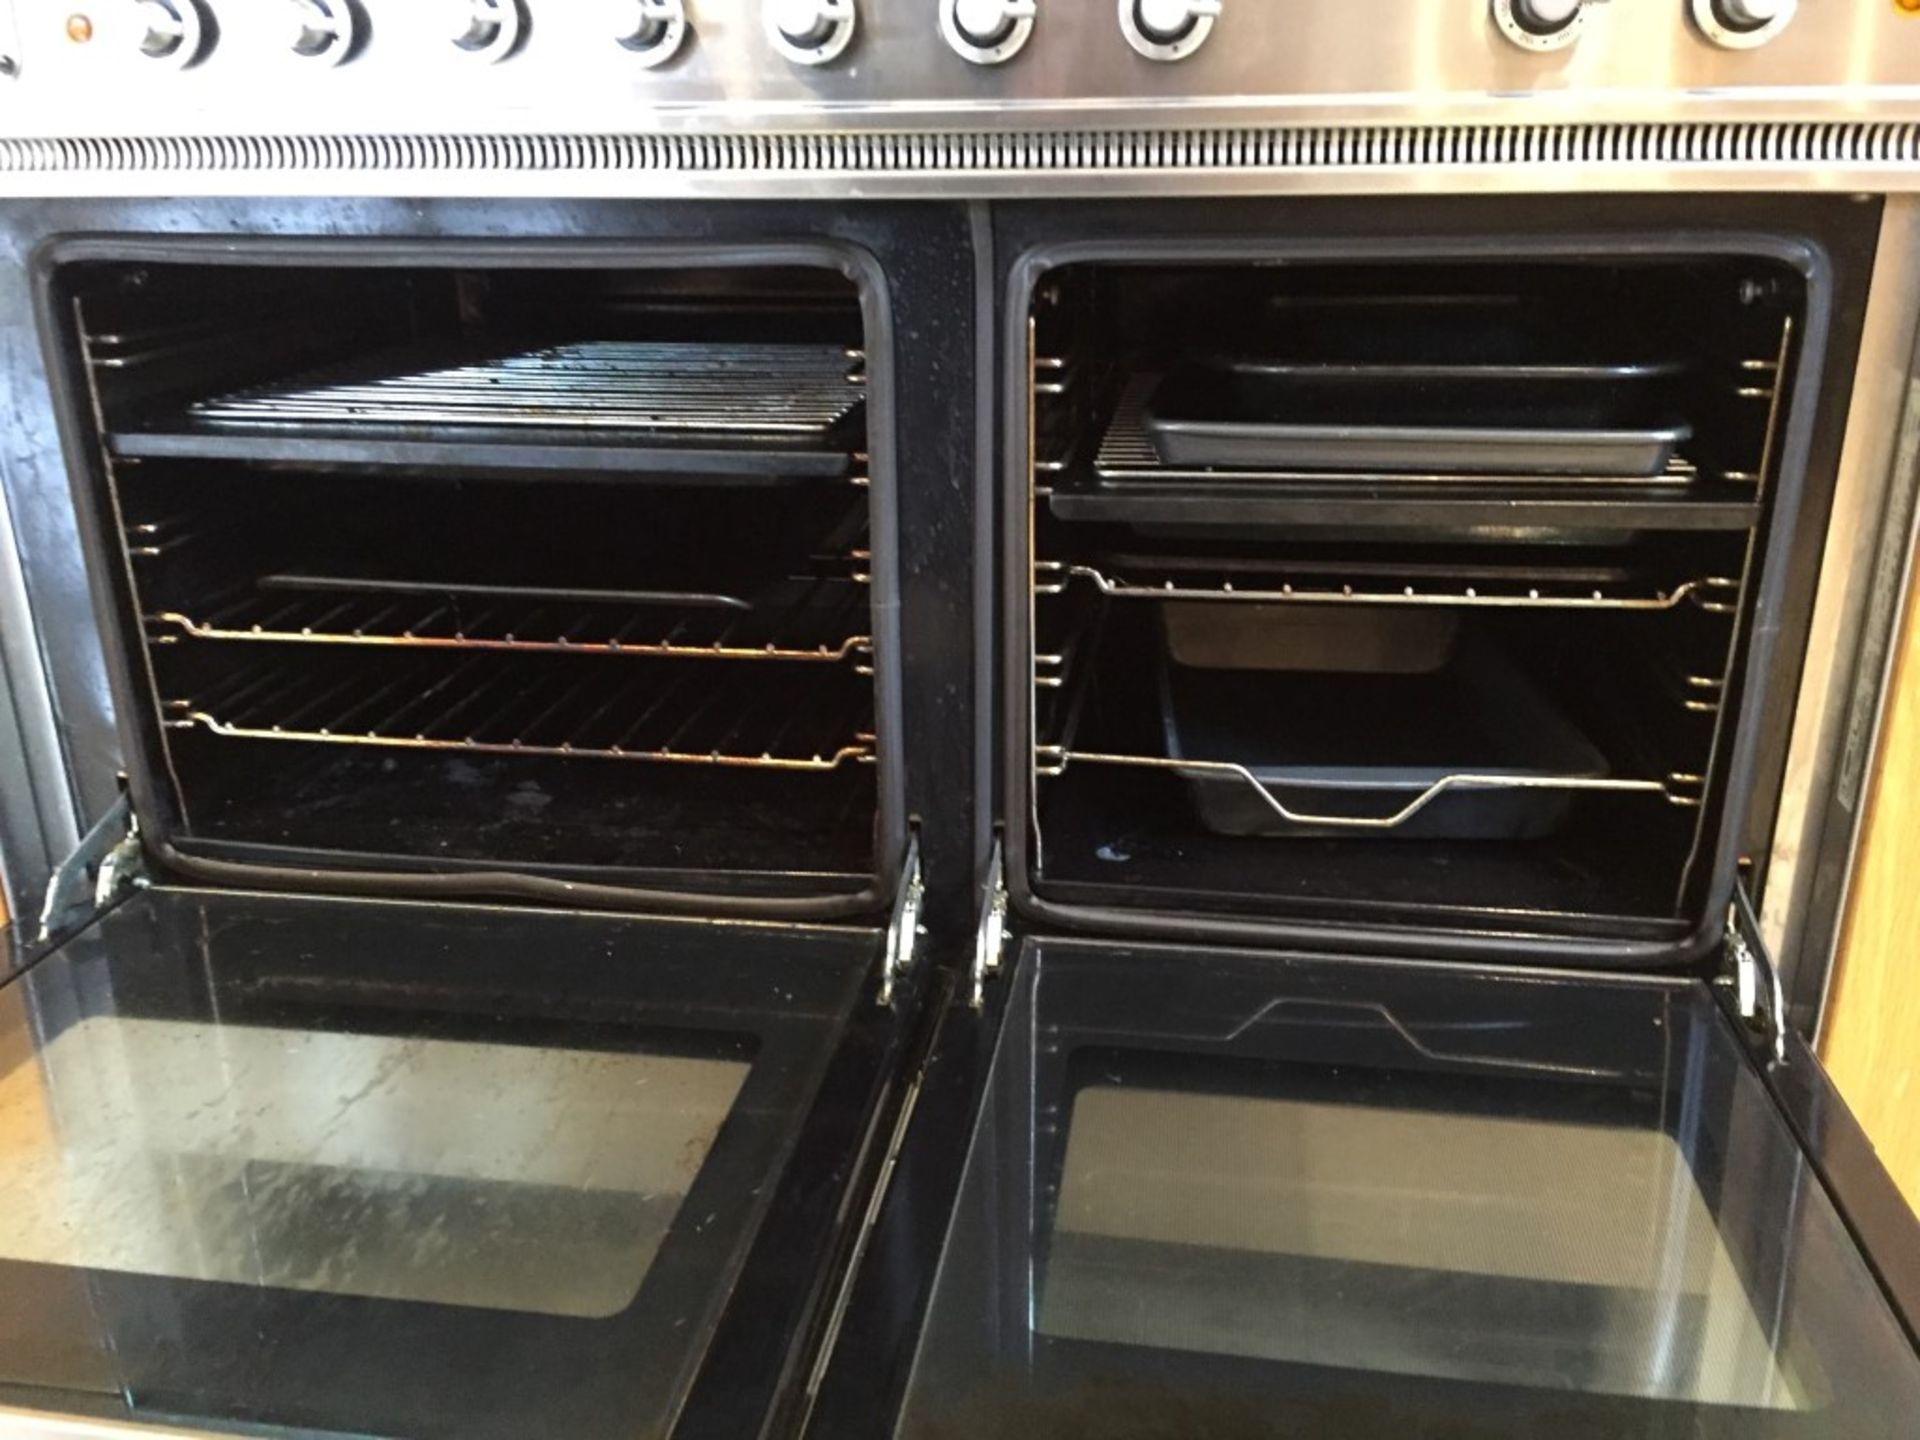 1 x Britannia Classic Range Cooker With Britannia Extractor Hood - Excellent Working Condition - Image 6 of 11